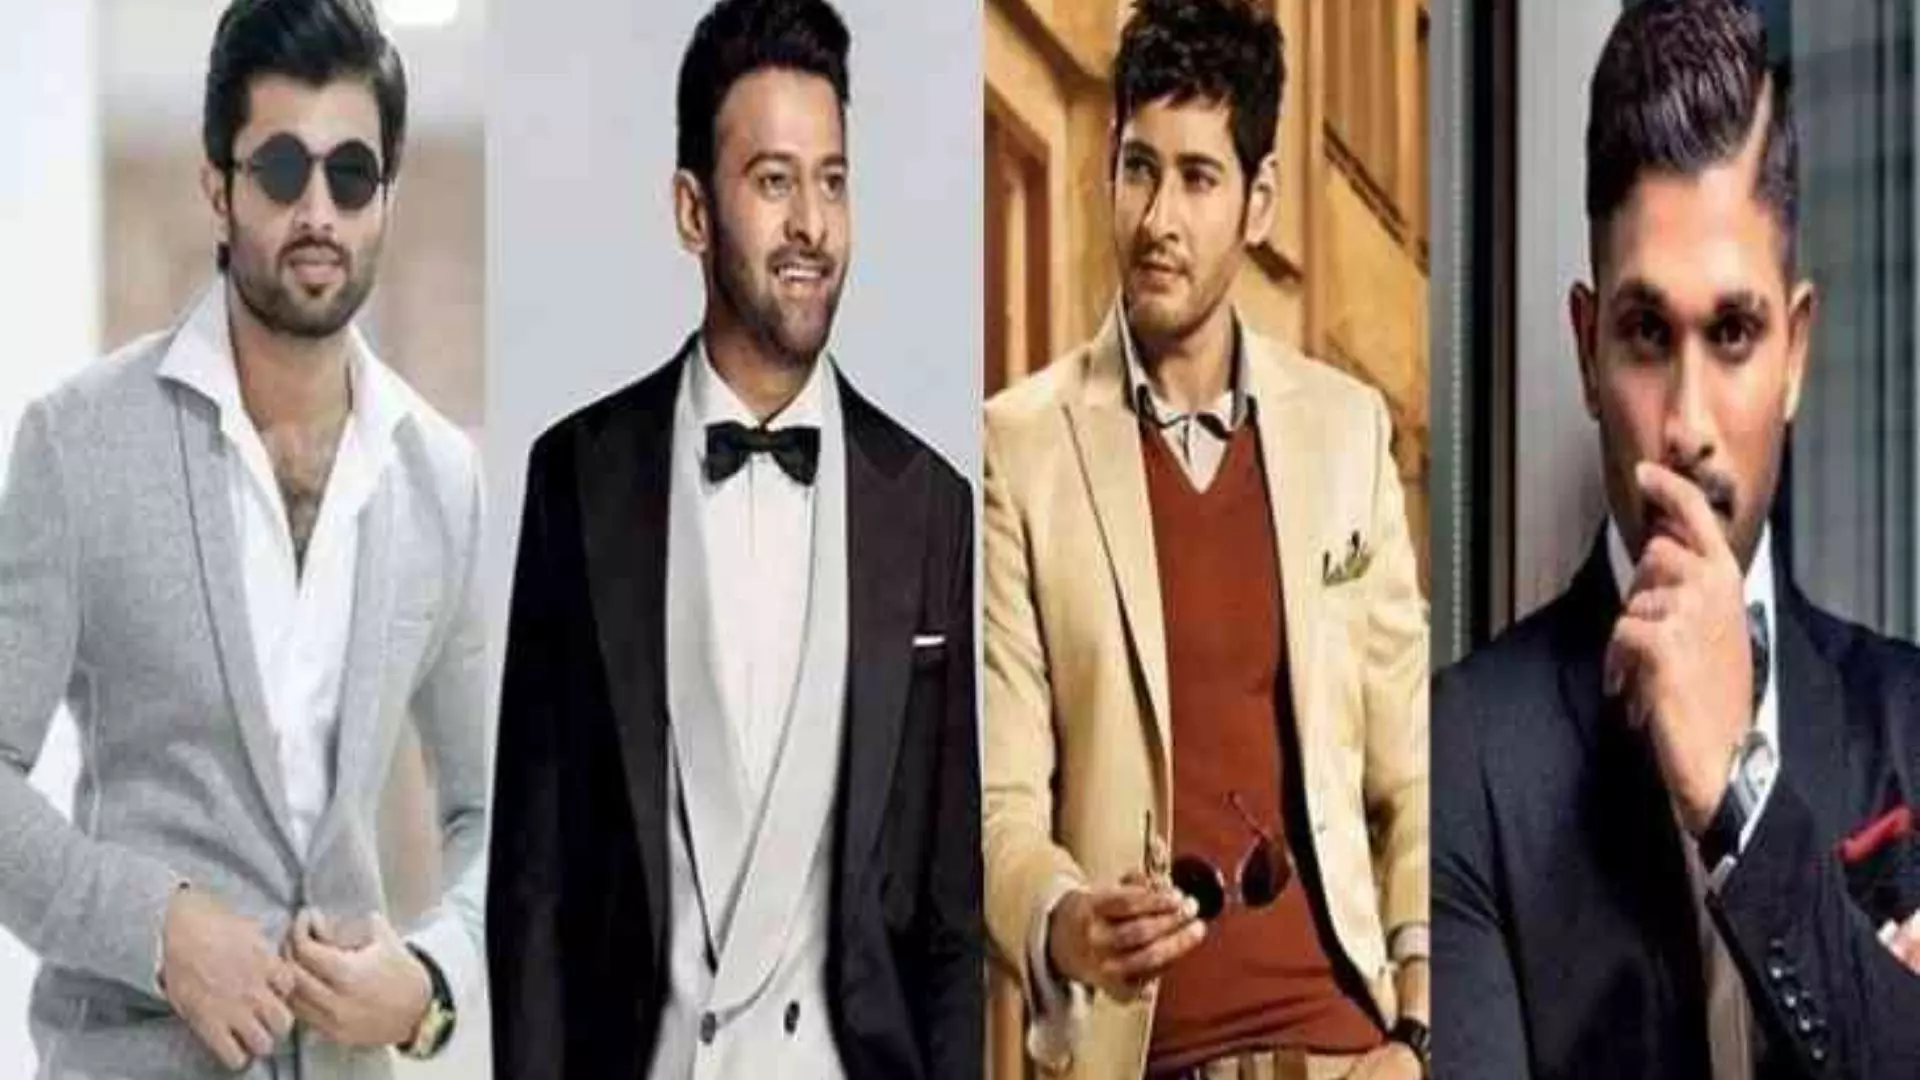 Highest Followers on Instagram, Facebook and Twitter in Tollywood Heroes 2021